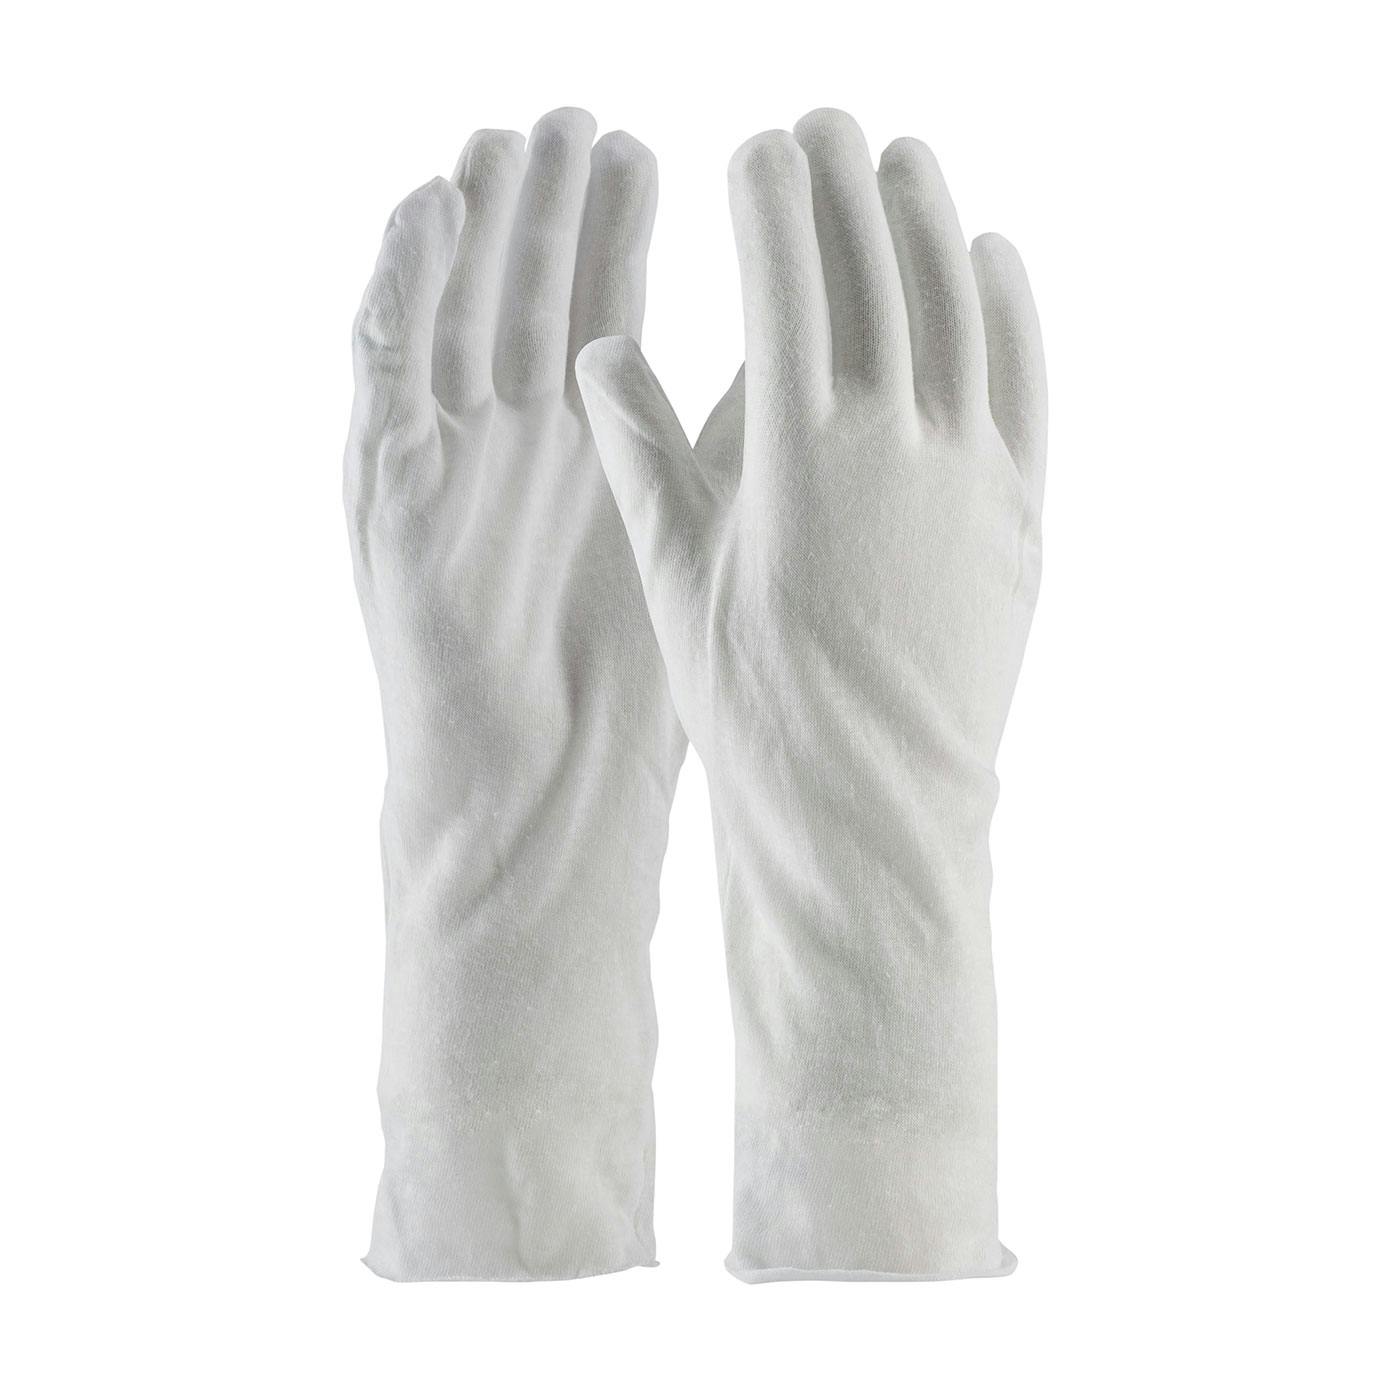 Premium, Light Weight Cotton Lisle Inspection Glove with Unhemmed Cuff - 14", White (97-500/14) - MENS